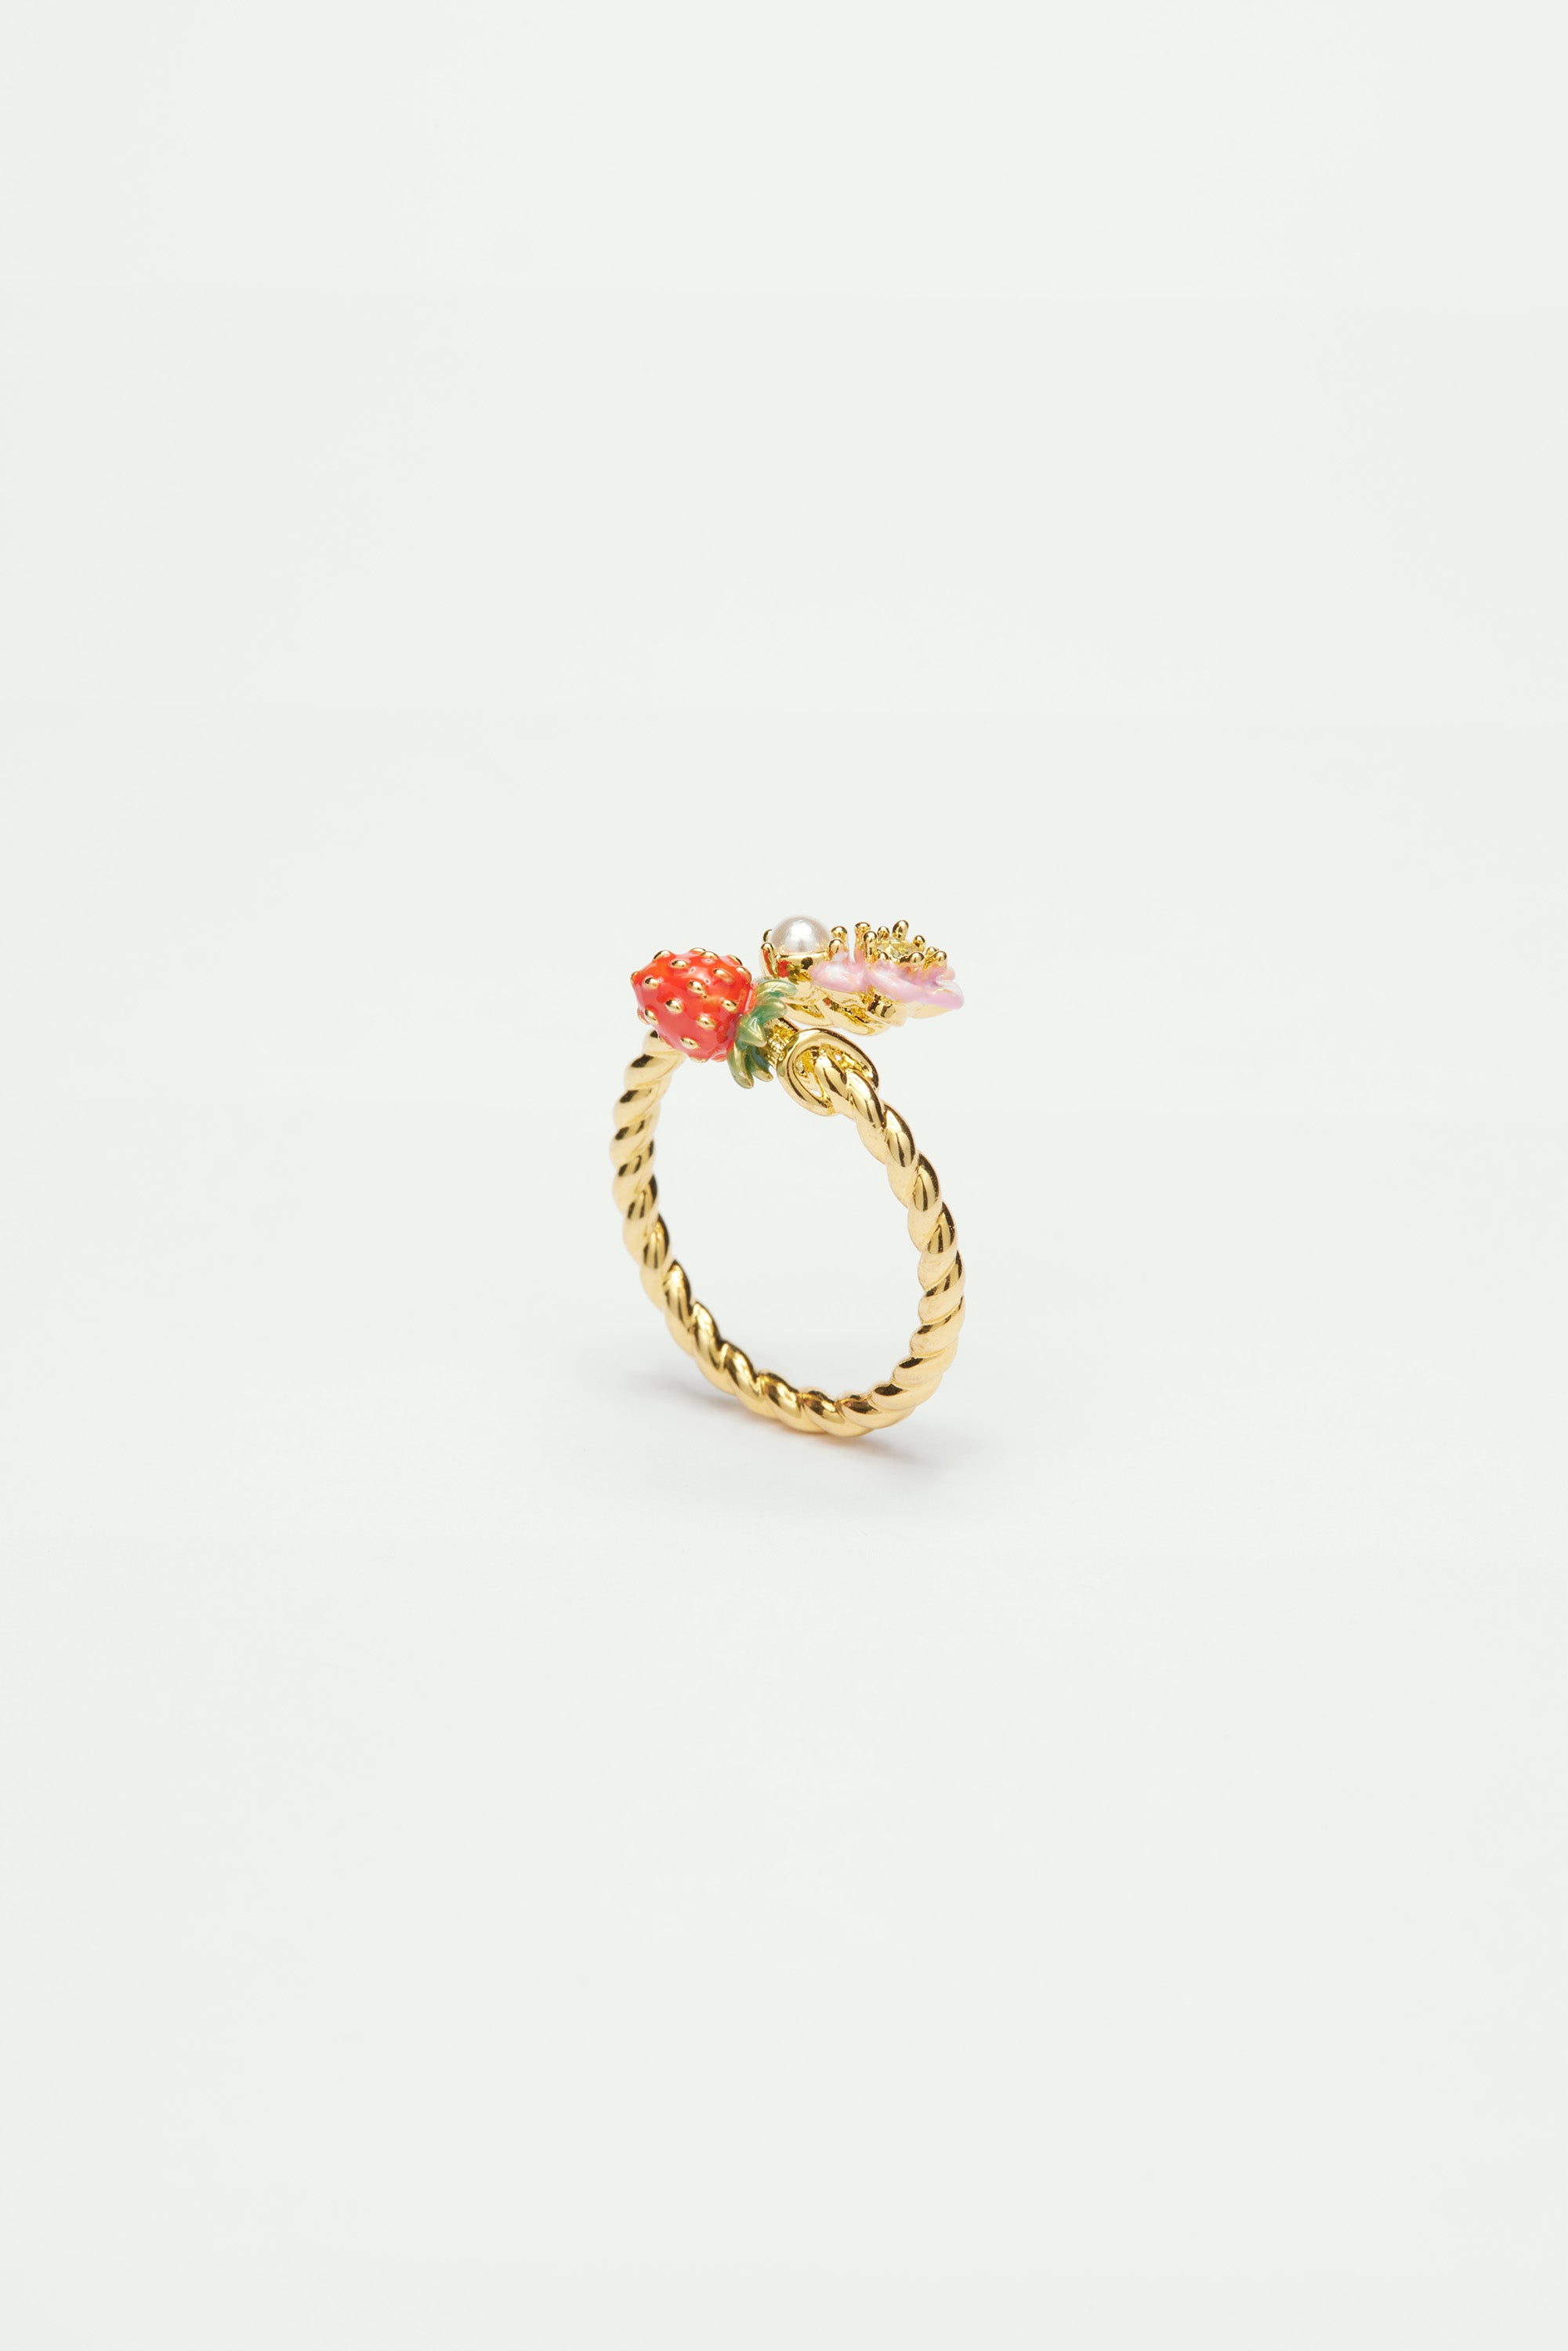 Wild strawberry and pink flower adjustable ring